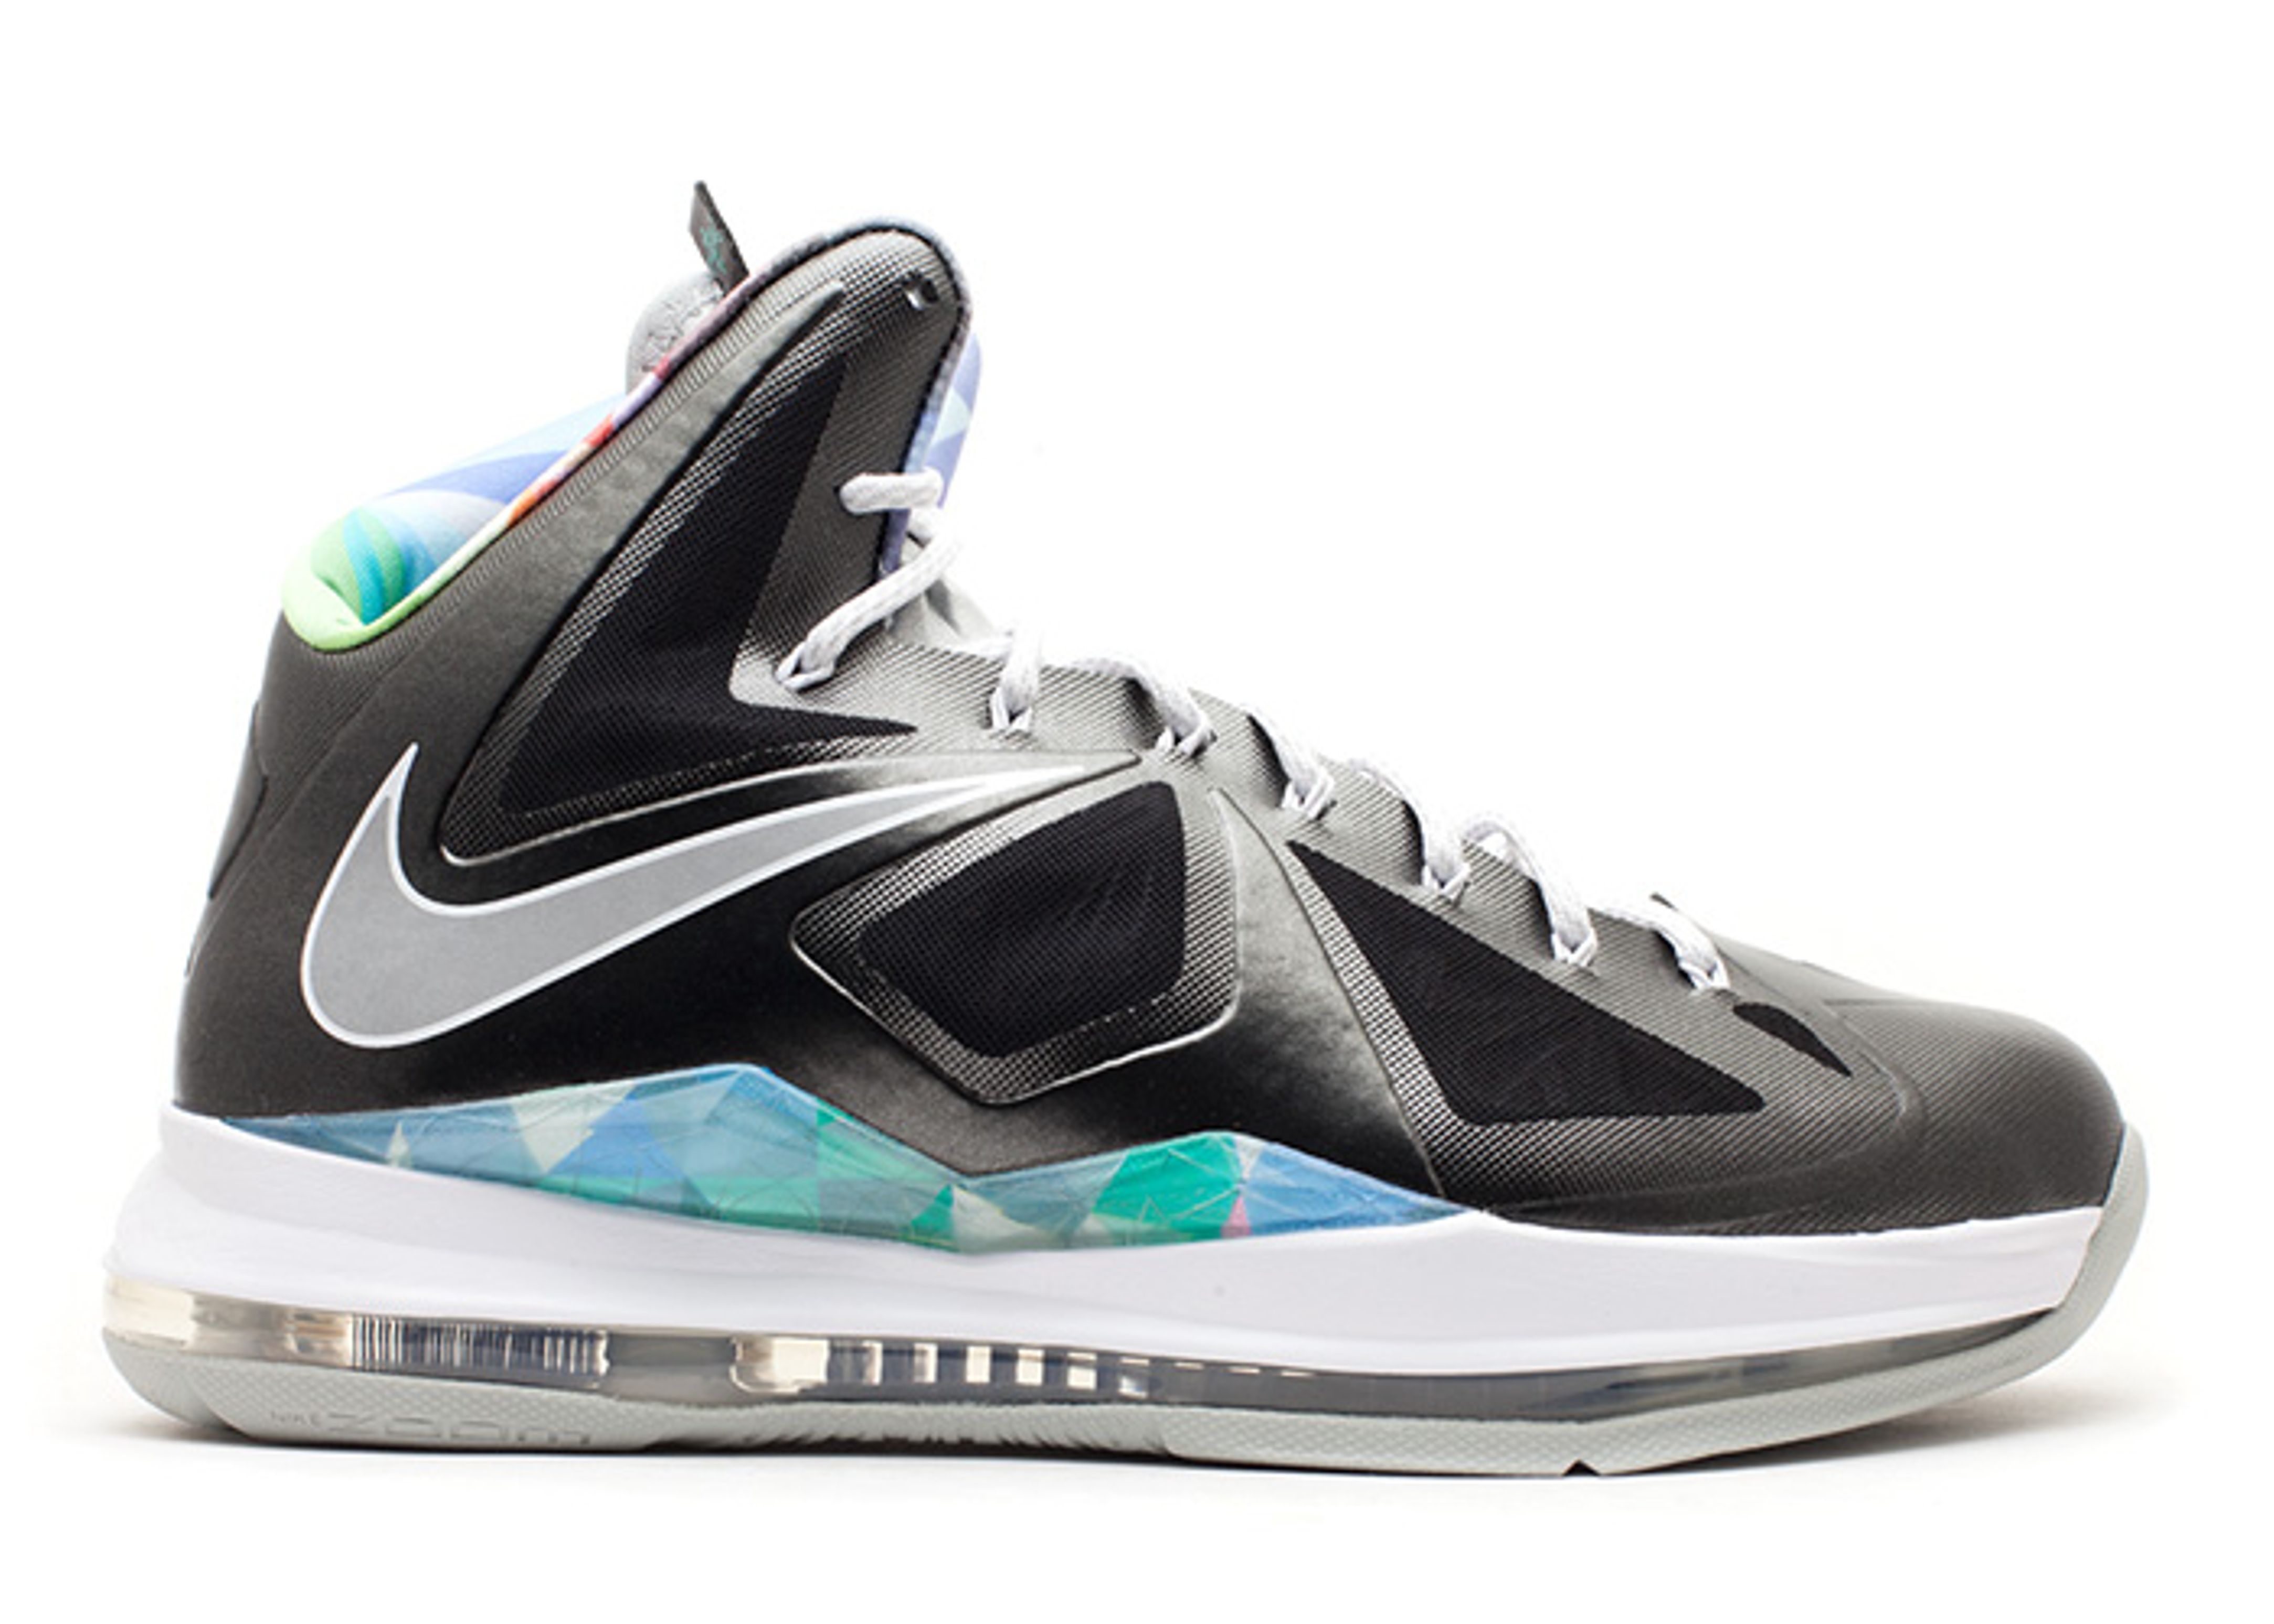 all lebron 10 colorways